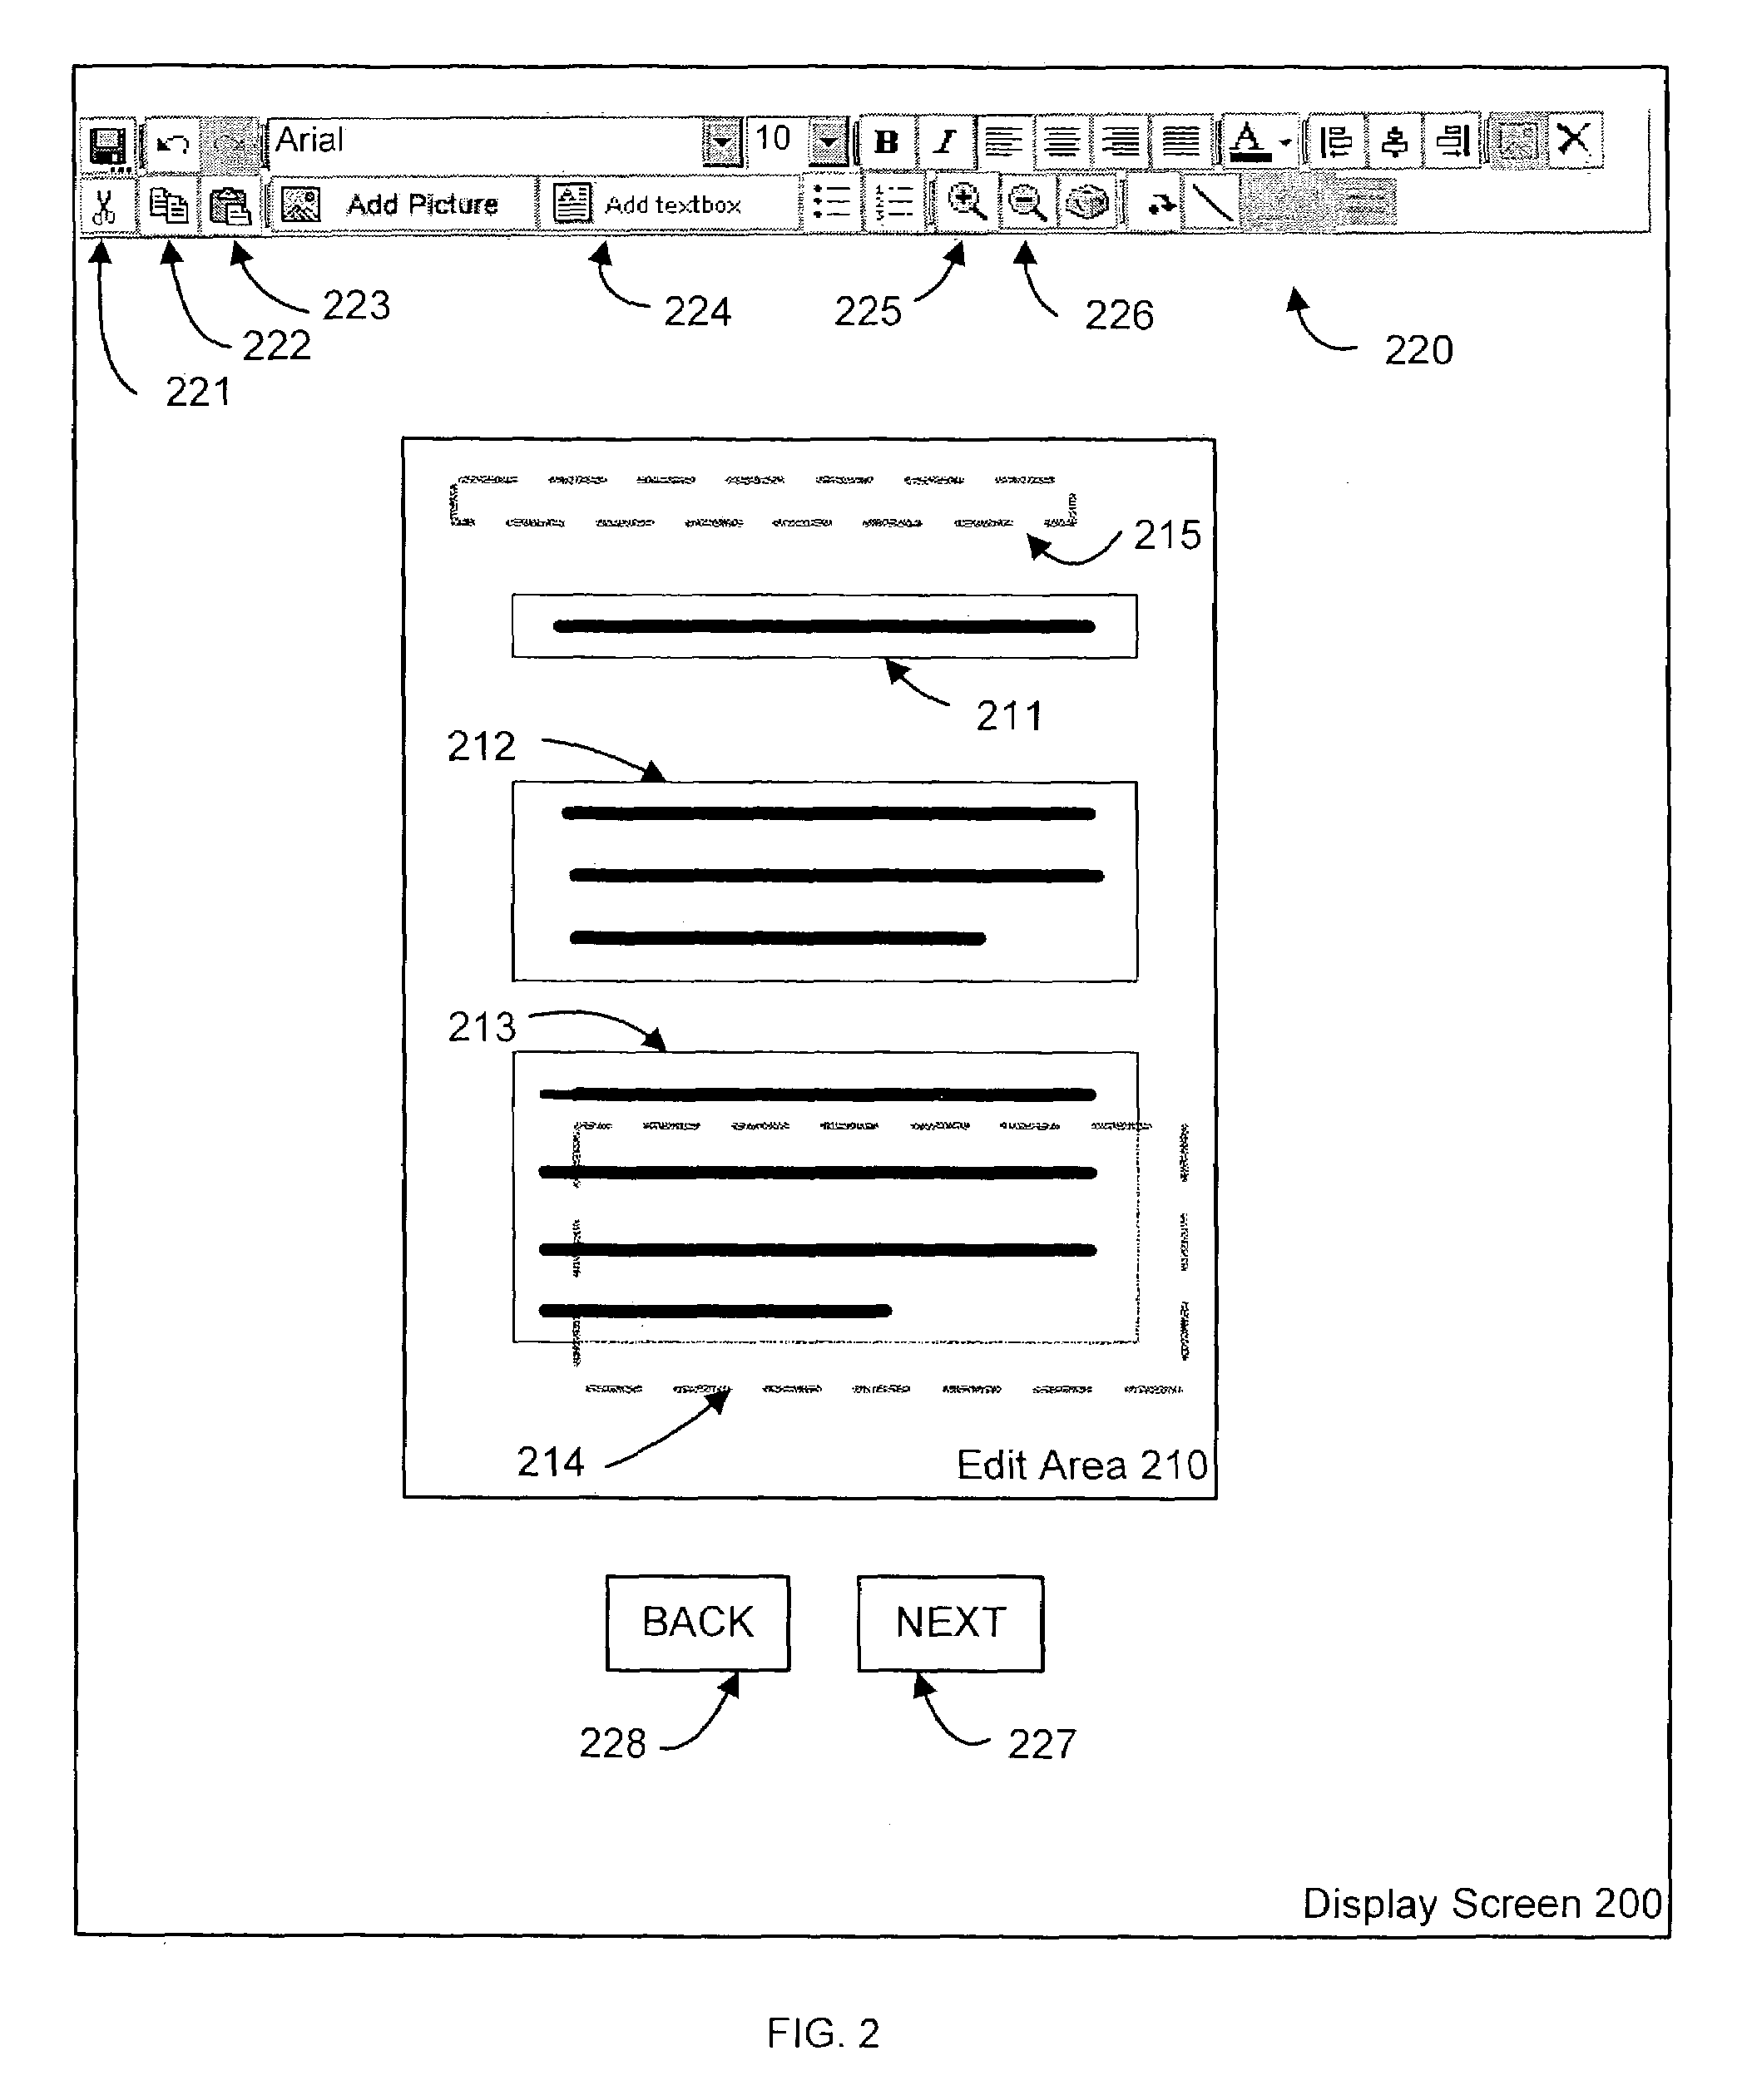 Methods employing multiple clipboards for storing and pasting textbook components